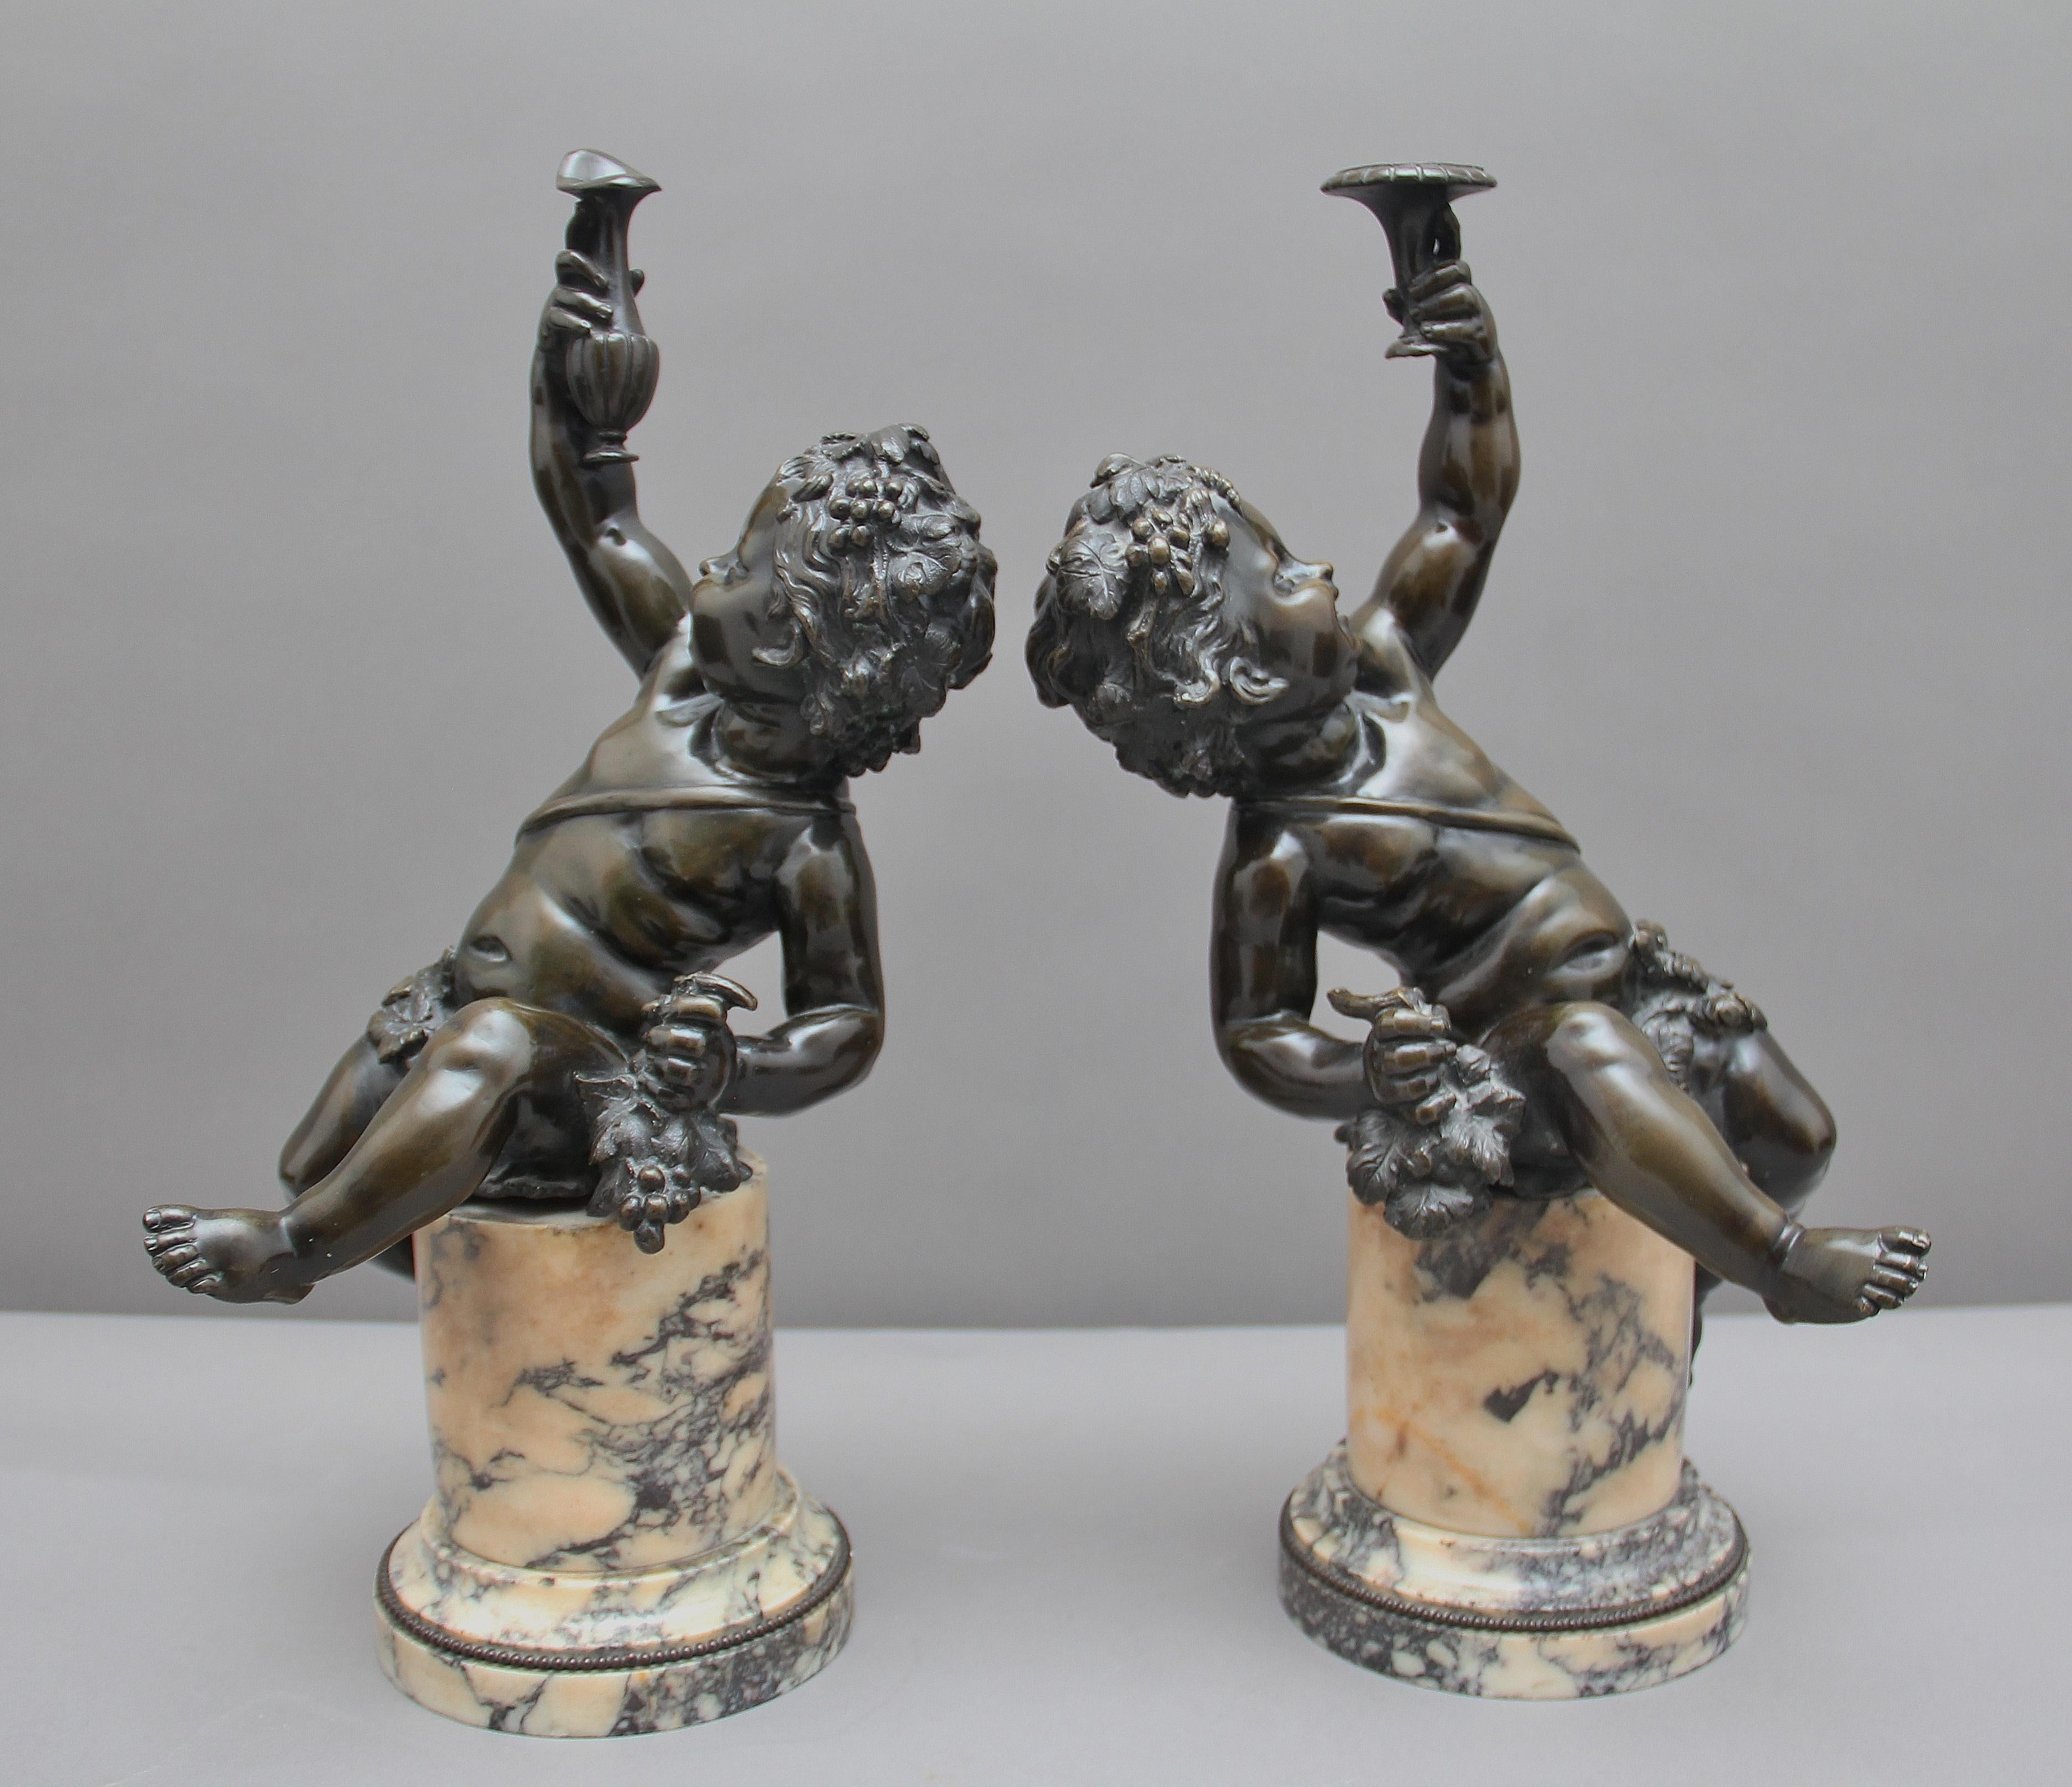 A superb pair of 19th century French putti on marble bases, the young Bacchanalian putti seated unsteadily on integral cylindrical variegated marble beaded and stepped pedestal bases, holding aloft a ewer, tazza and bunch of grapes. These pair of